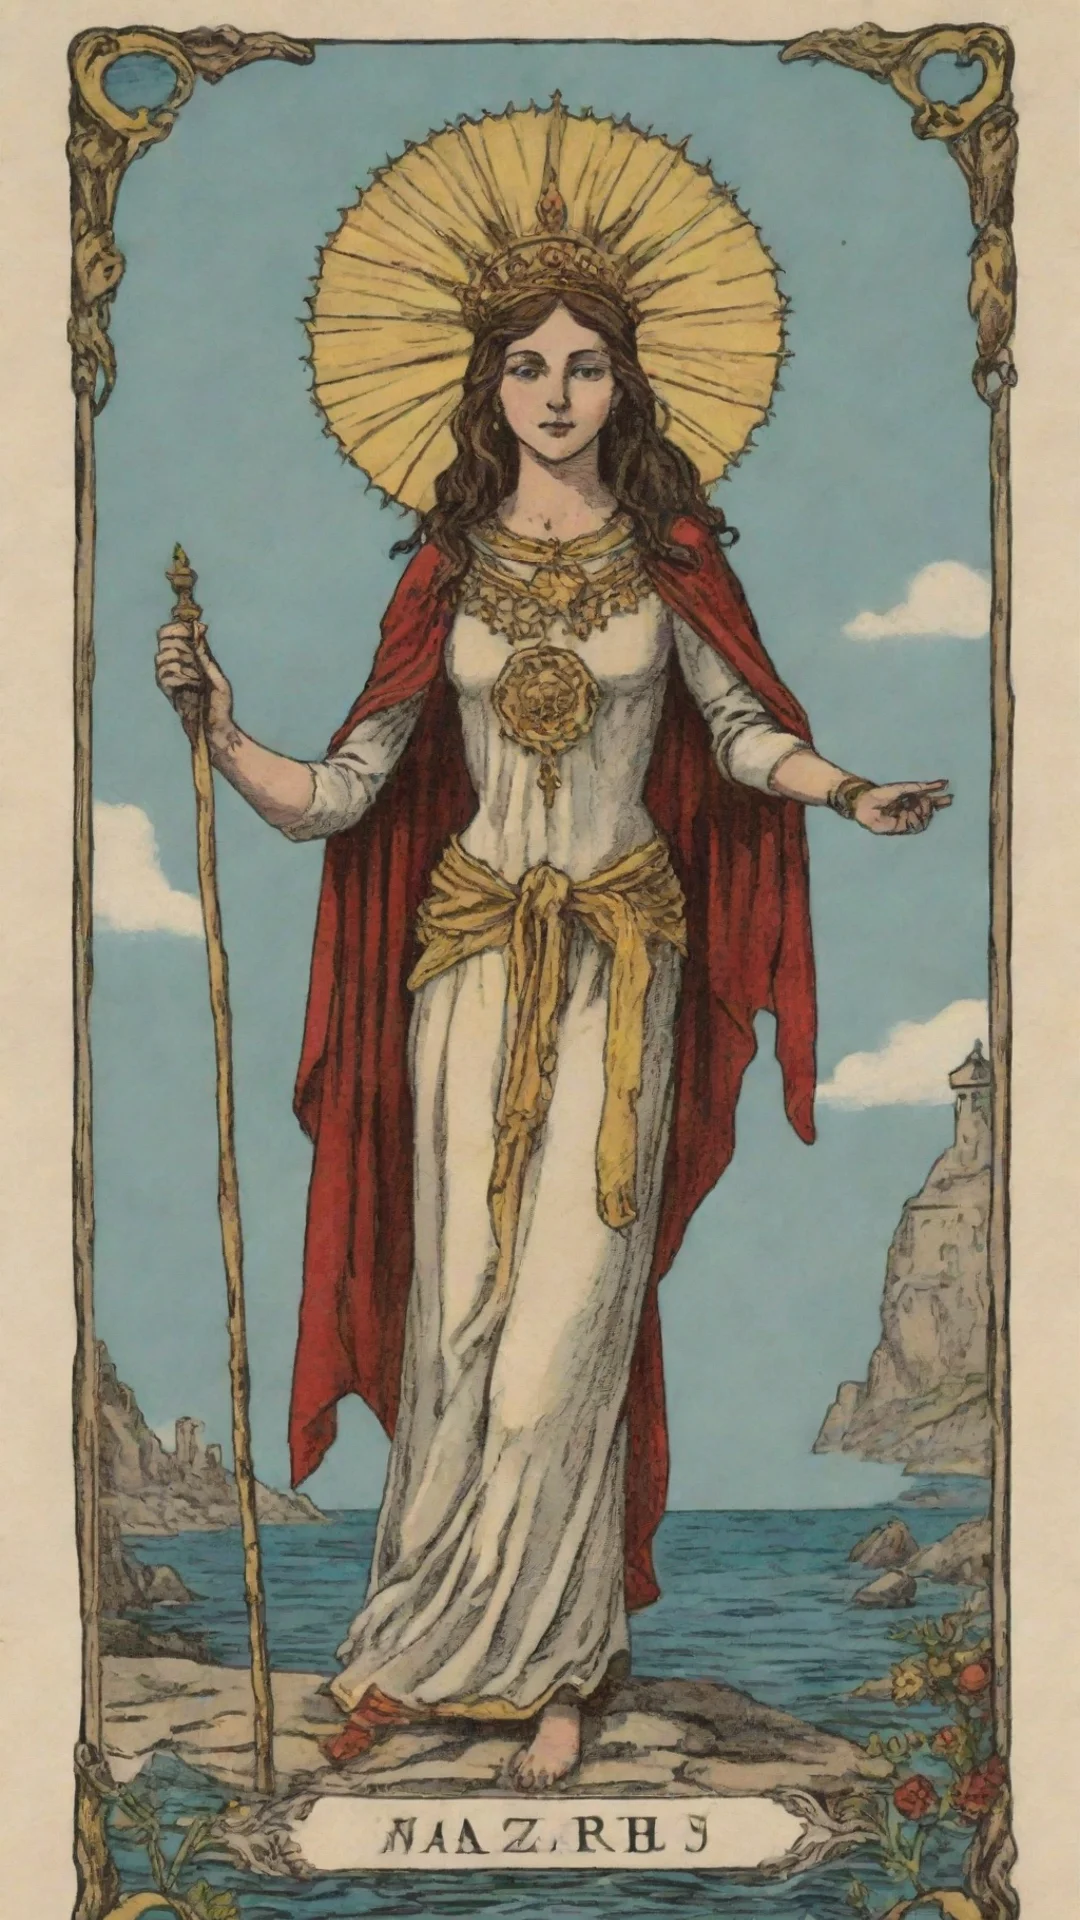 generate a tarot card in the marseille style but original as an illustration tall